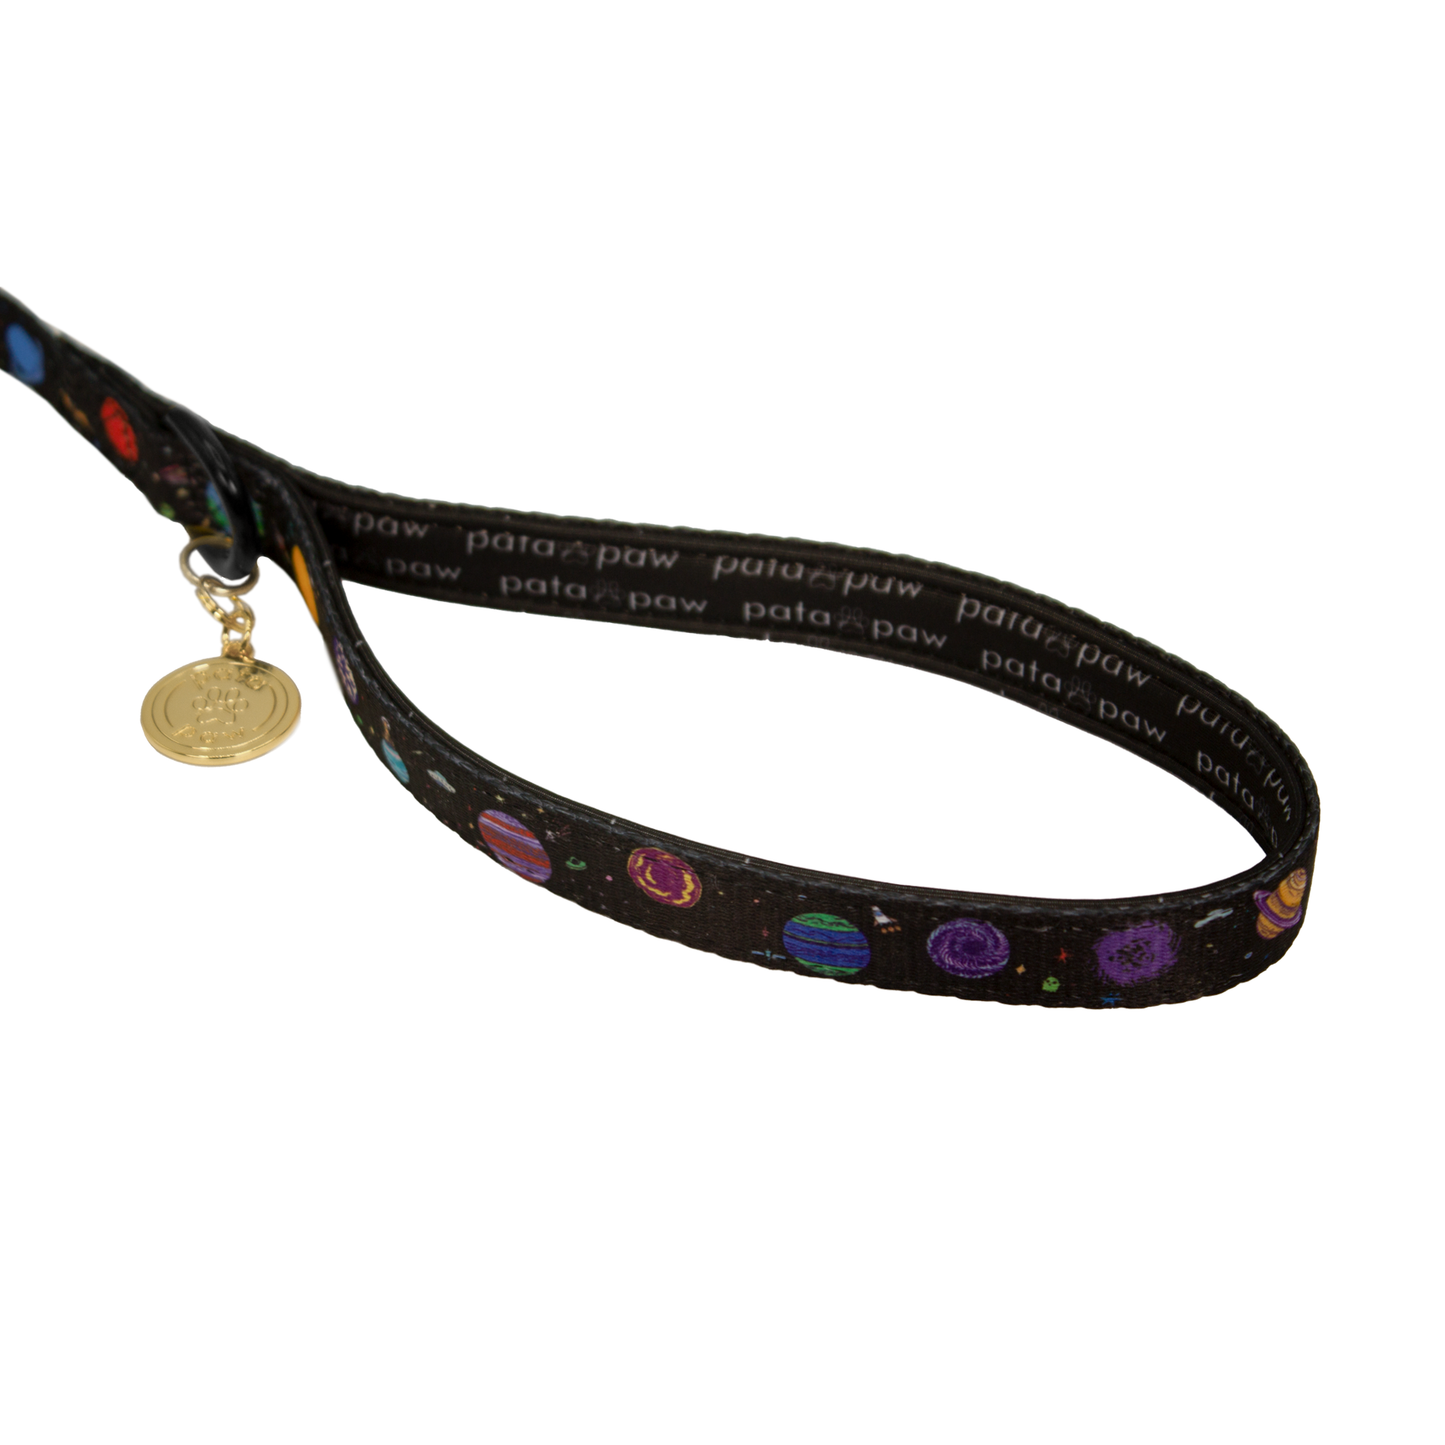 pata paw space explorer leash showing signature handle, metallic ring to attach a poop bag holder and golden paw medal